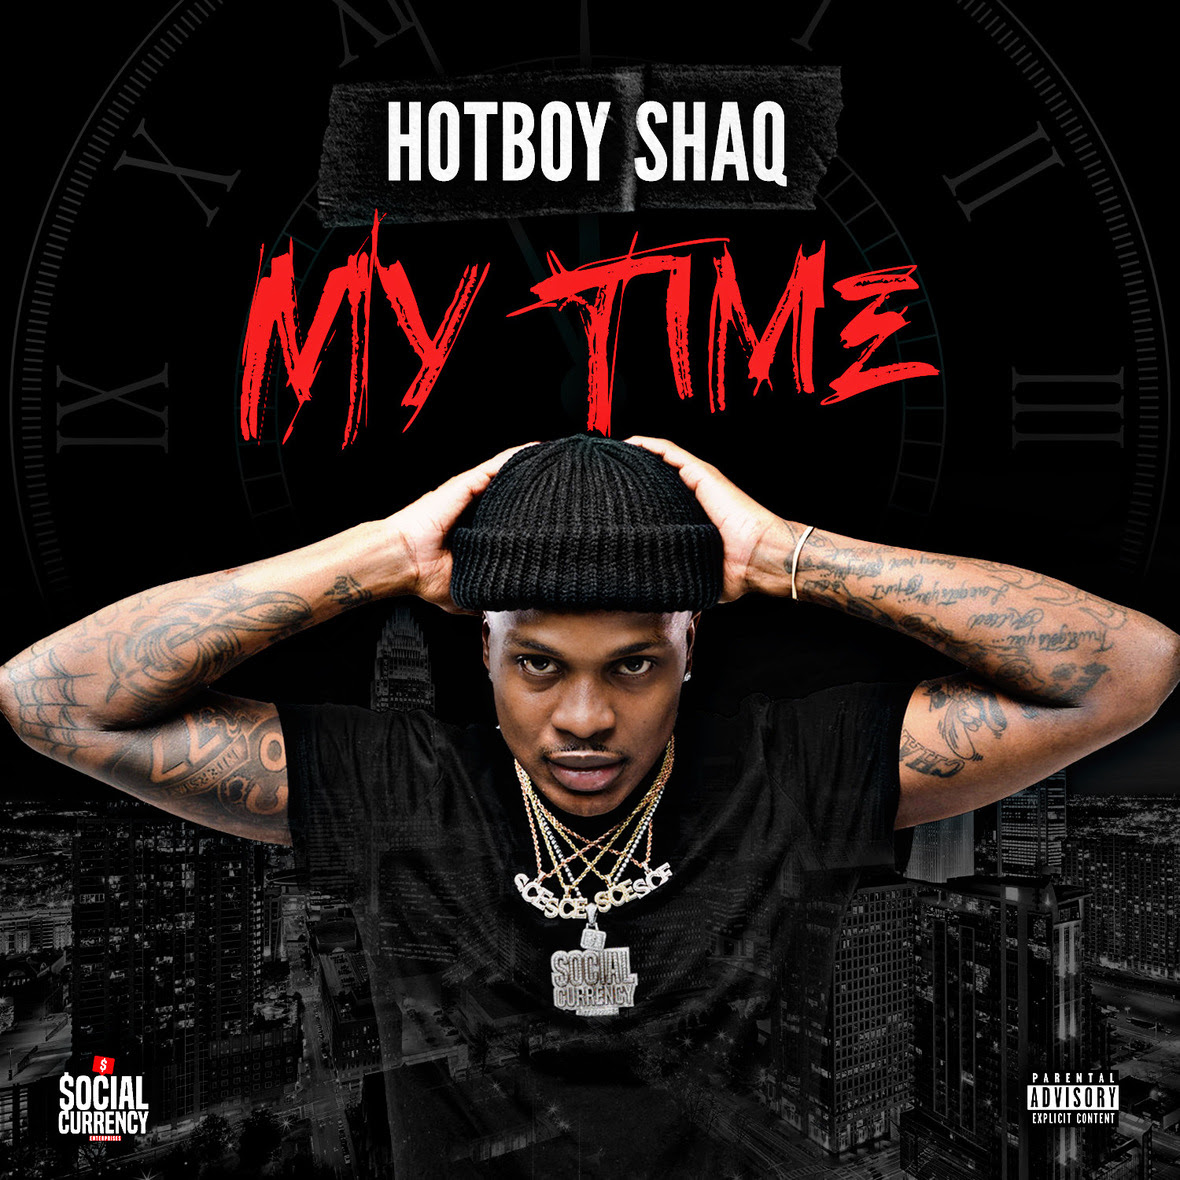 Hotboy Shaq’s New Album “My Time” Showcases the Struggle, the Process, and the Future of His Career